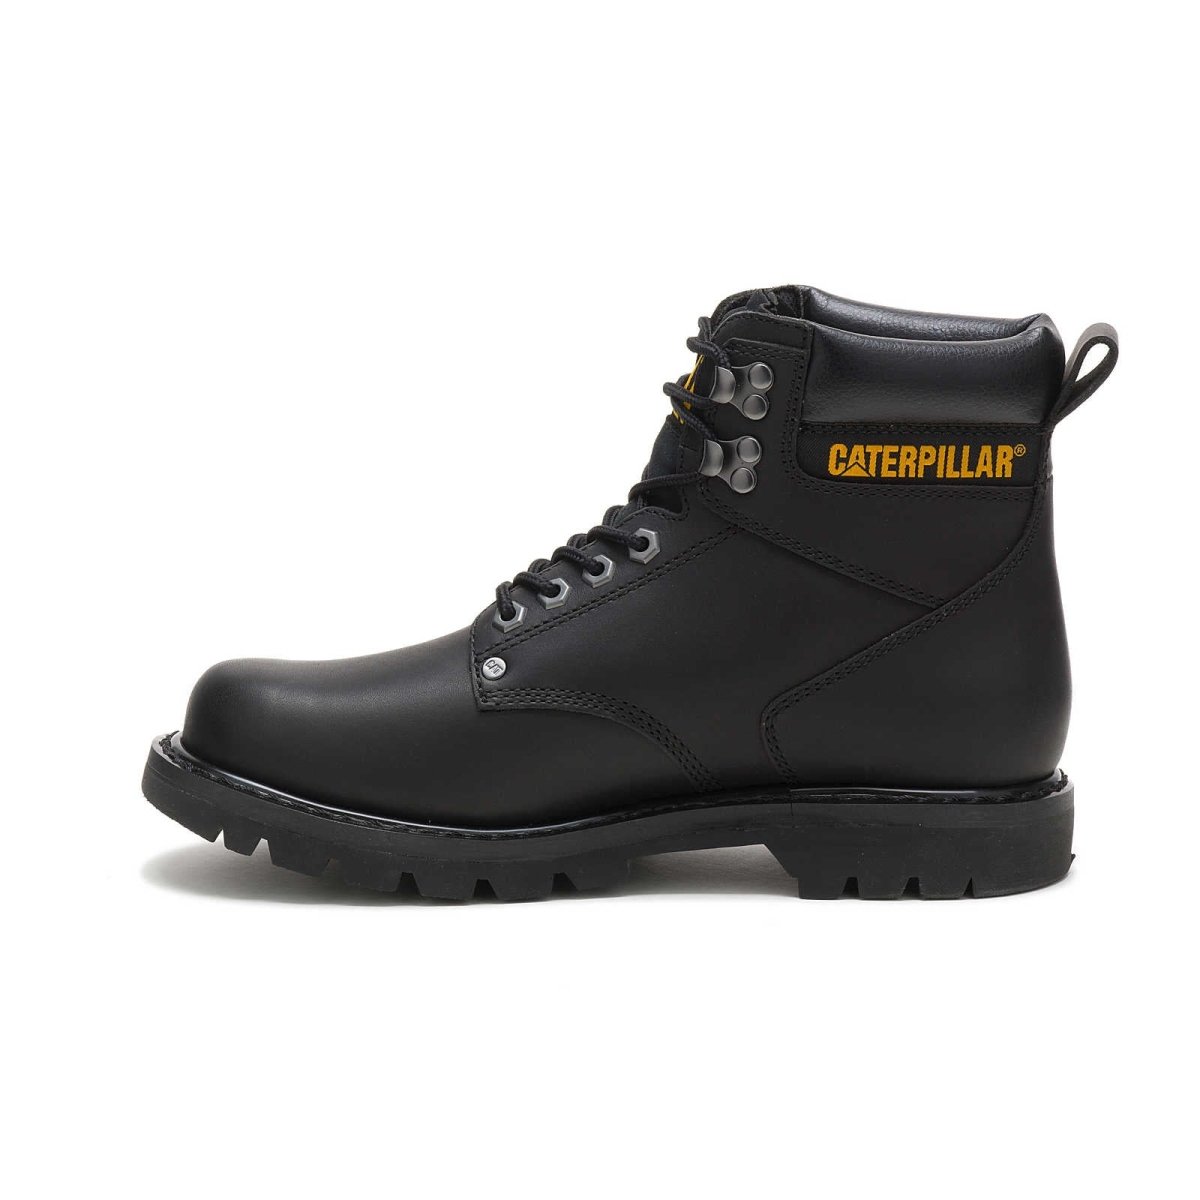 CATERPILLAR SECOND SHIFT MEN'S WORK BOOT (P70043) IN BLACK - TLW Shoes